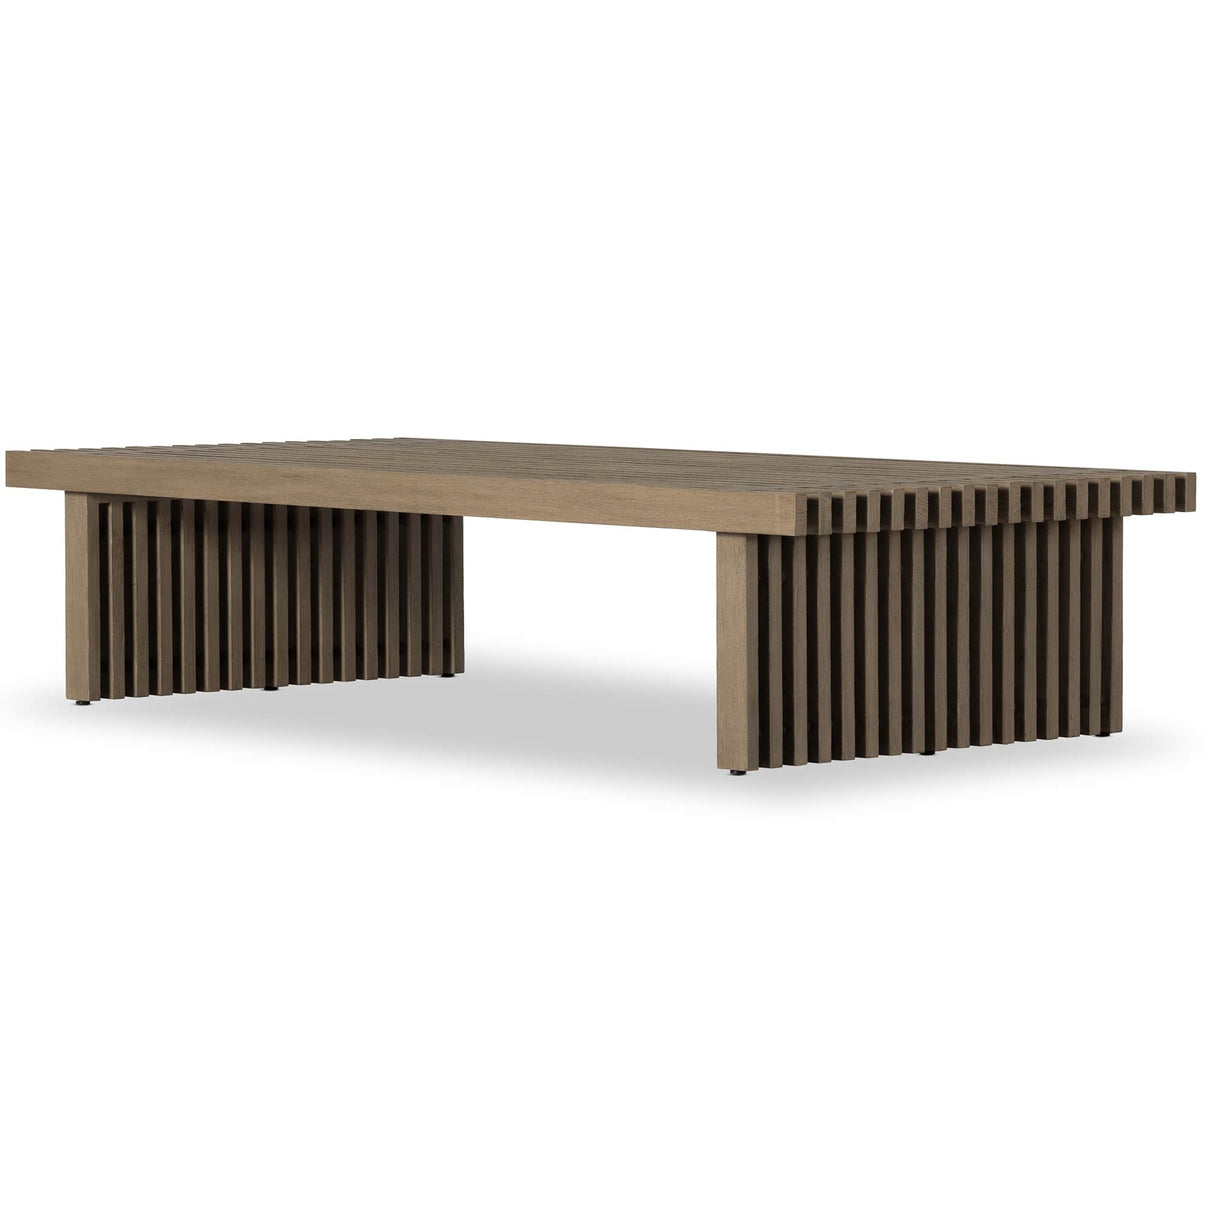 Four Hands Haskell Outdoor Coffee Table Outdoor Furniture